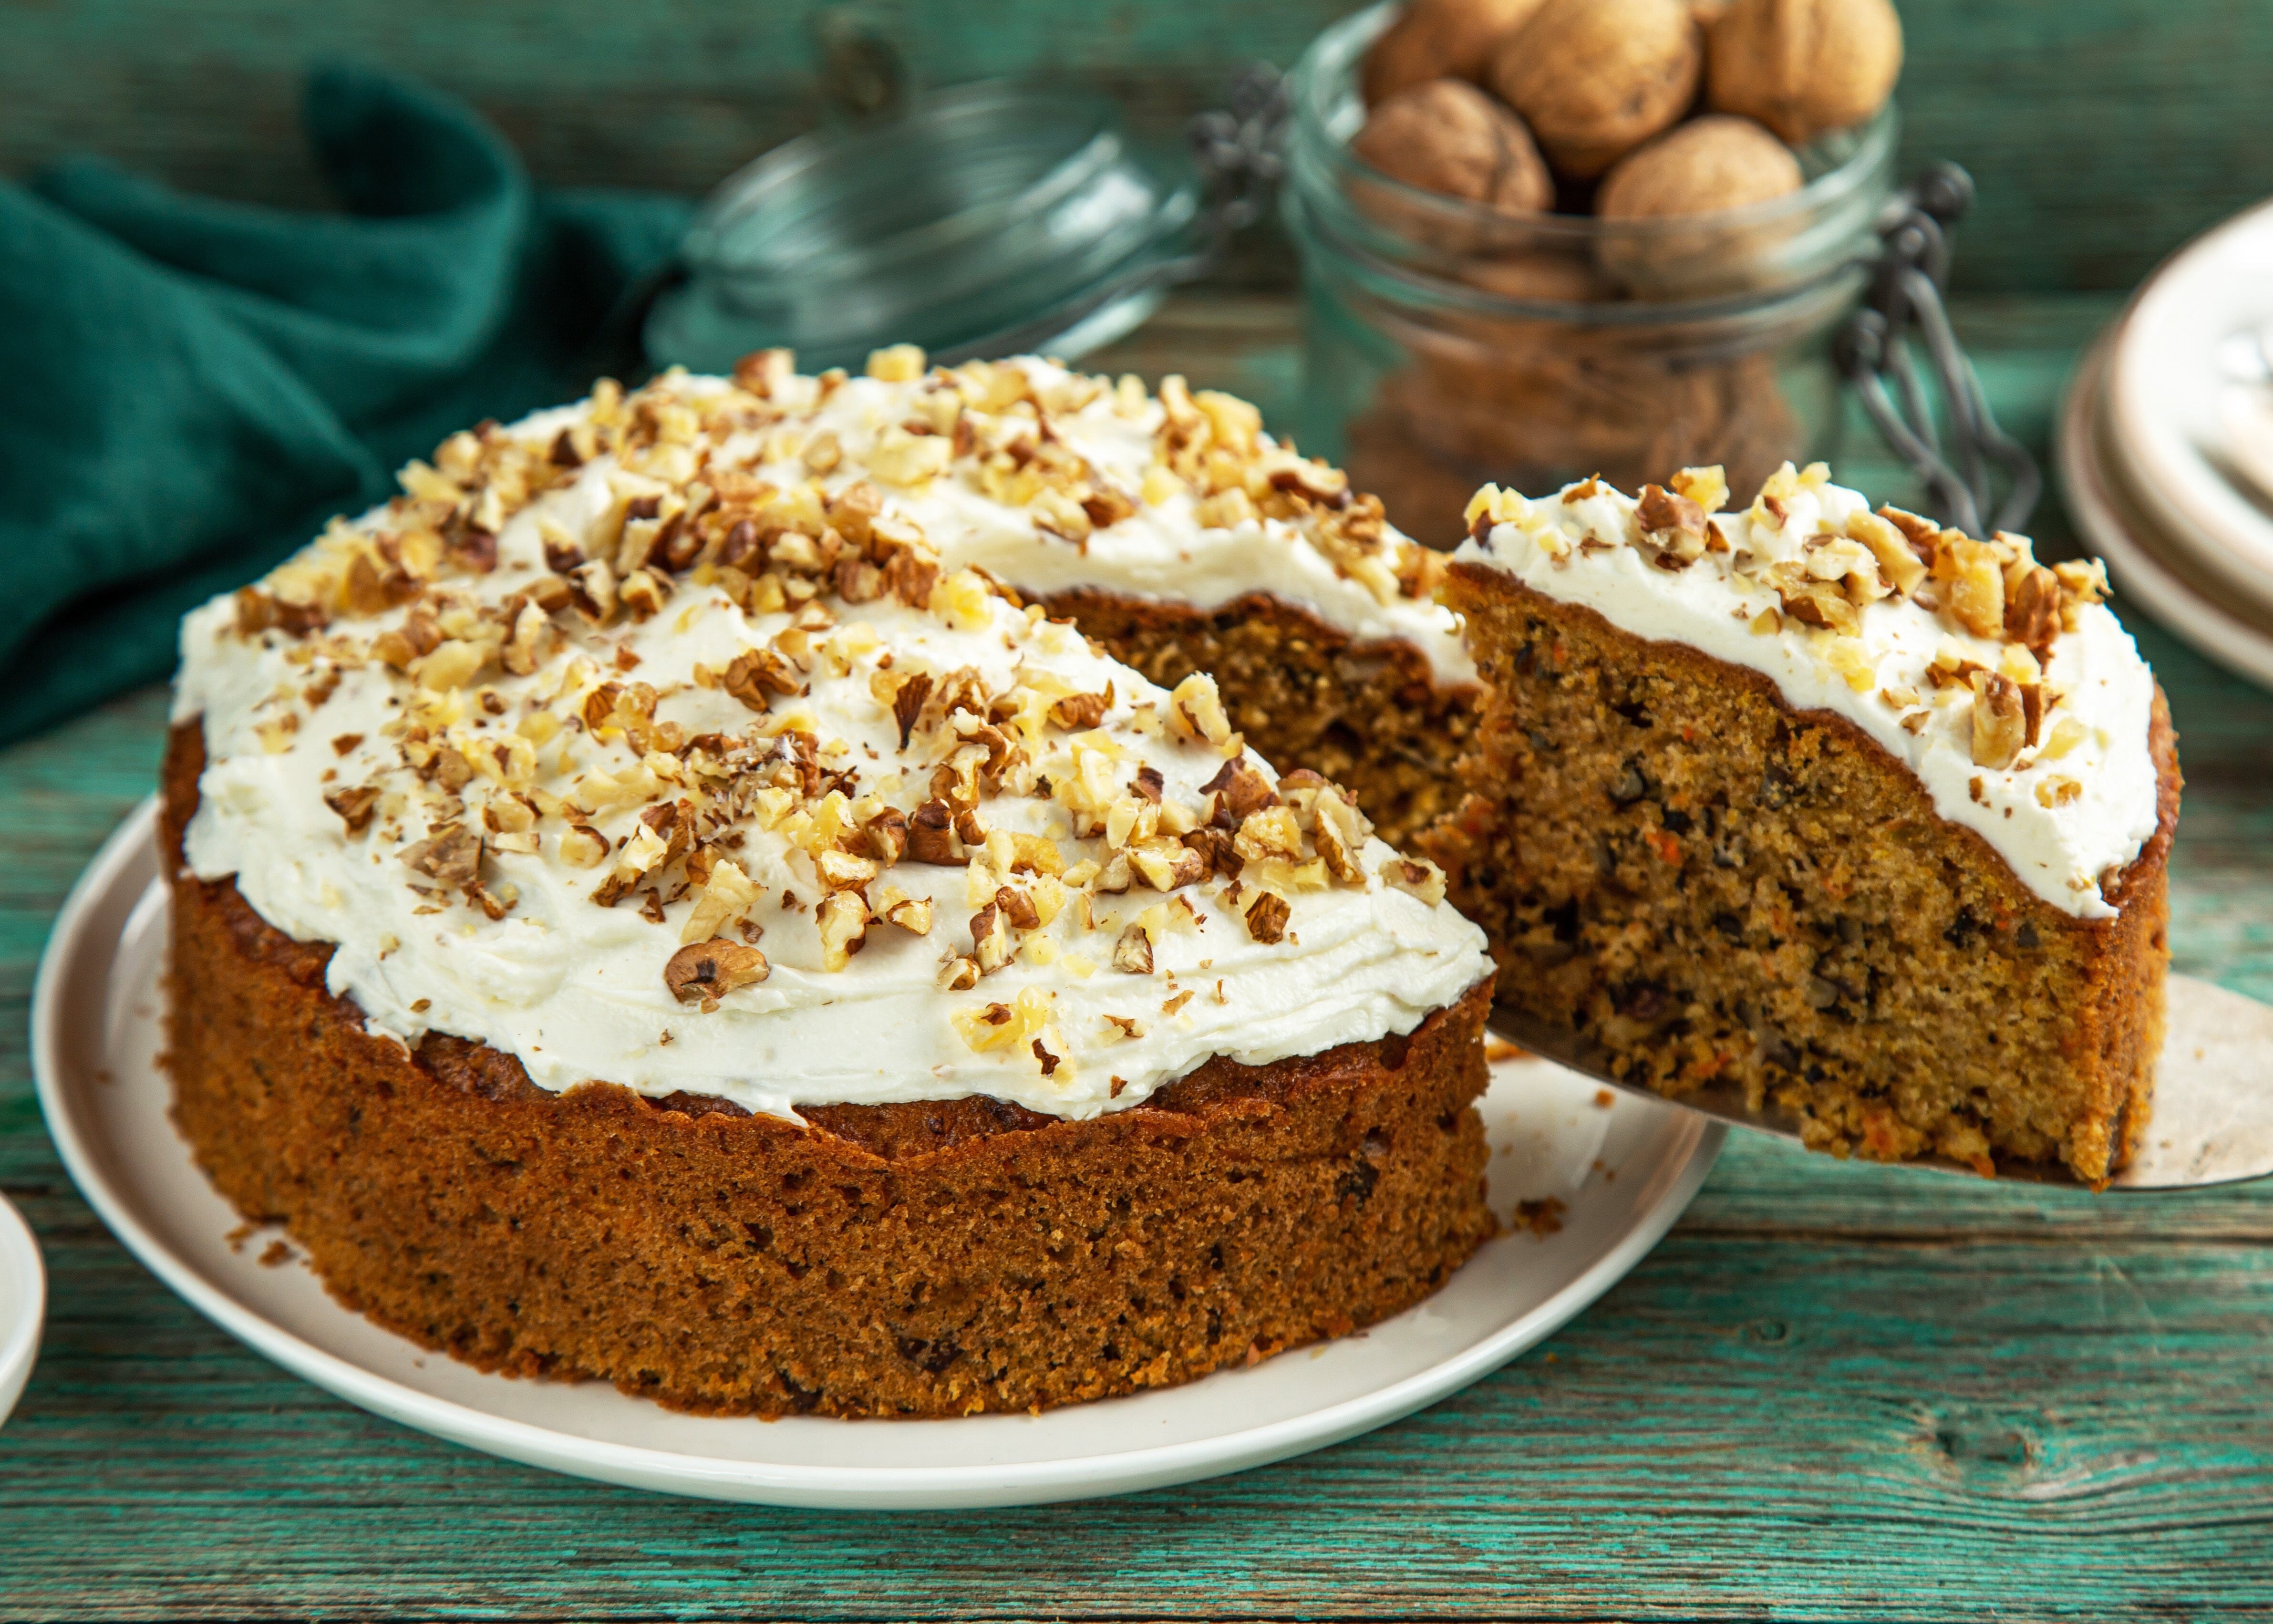 Mom’s Carrot Cake with Creamy Cream Cheese Topping (+Cinnamon, walnuts and coconut sugar)